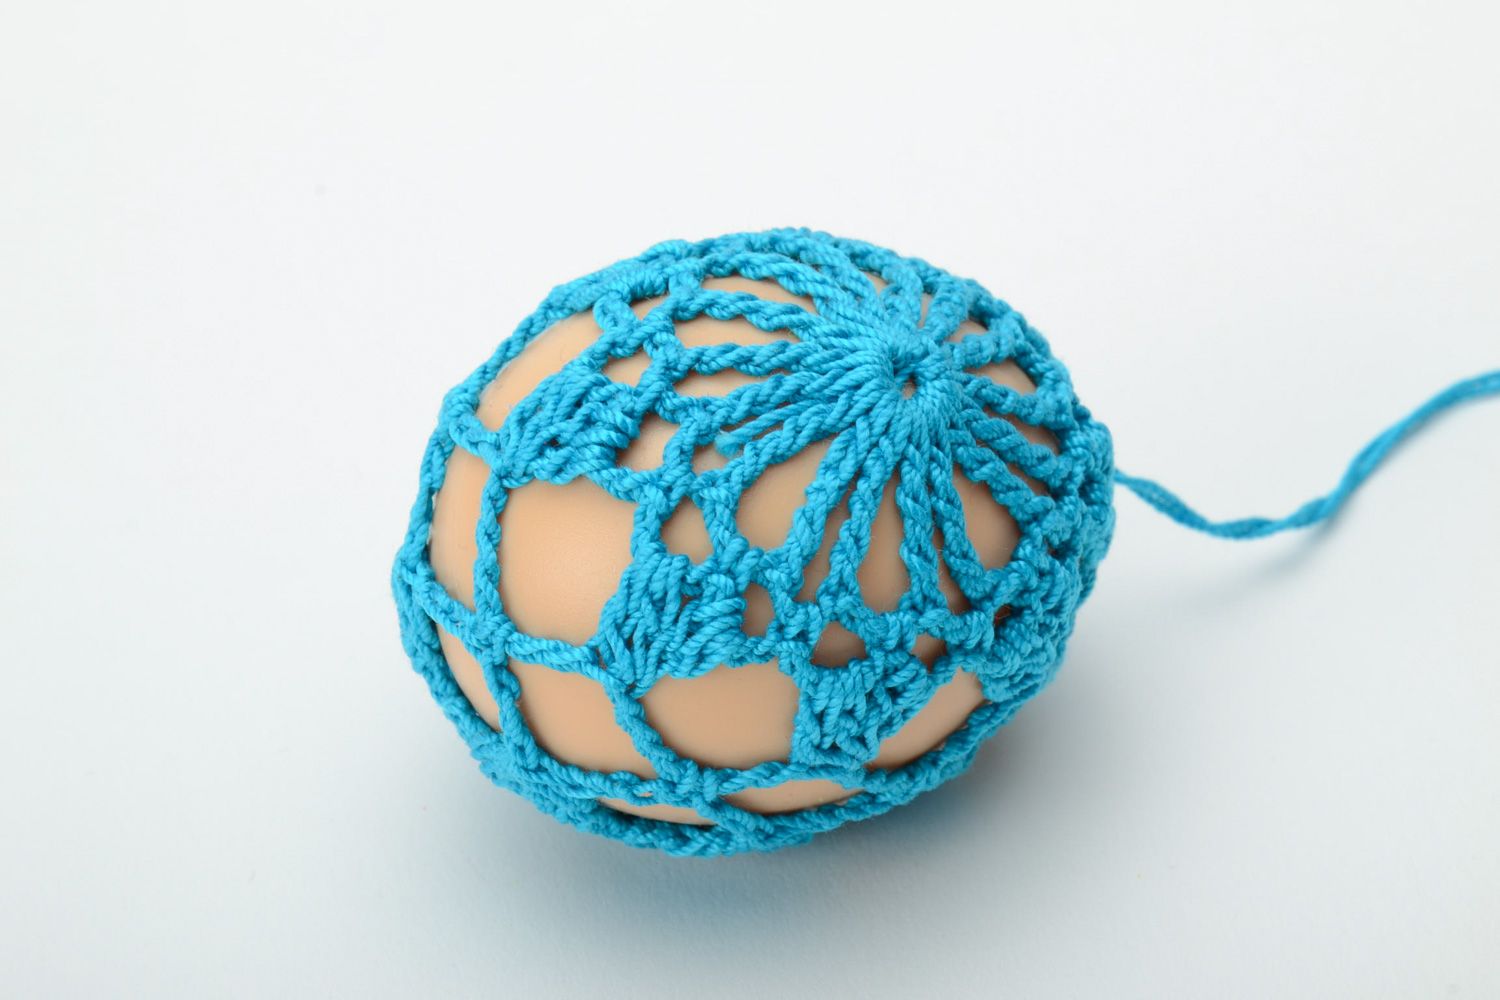 Homemade blue Easter egg crocheted over with cotton threads photo 2